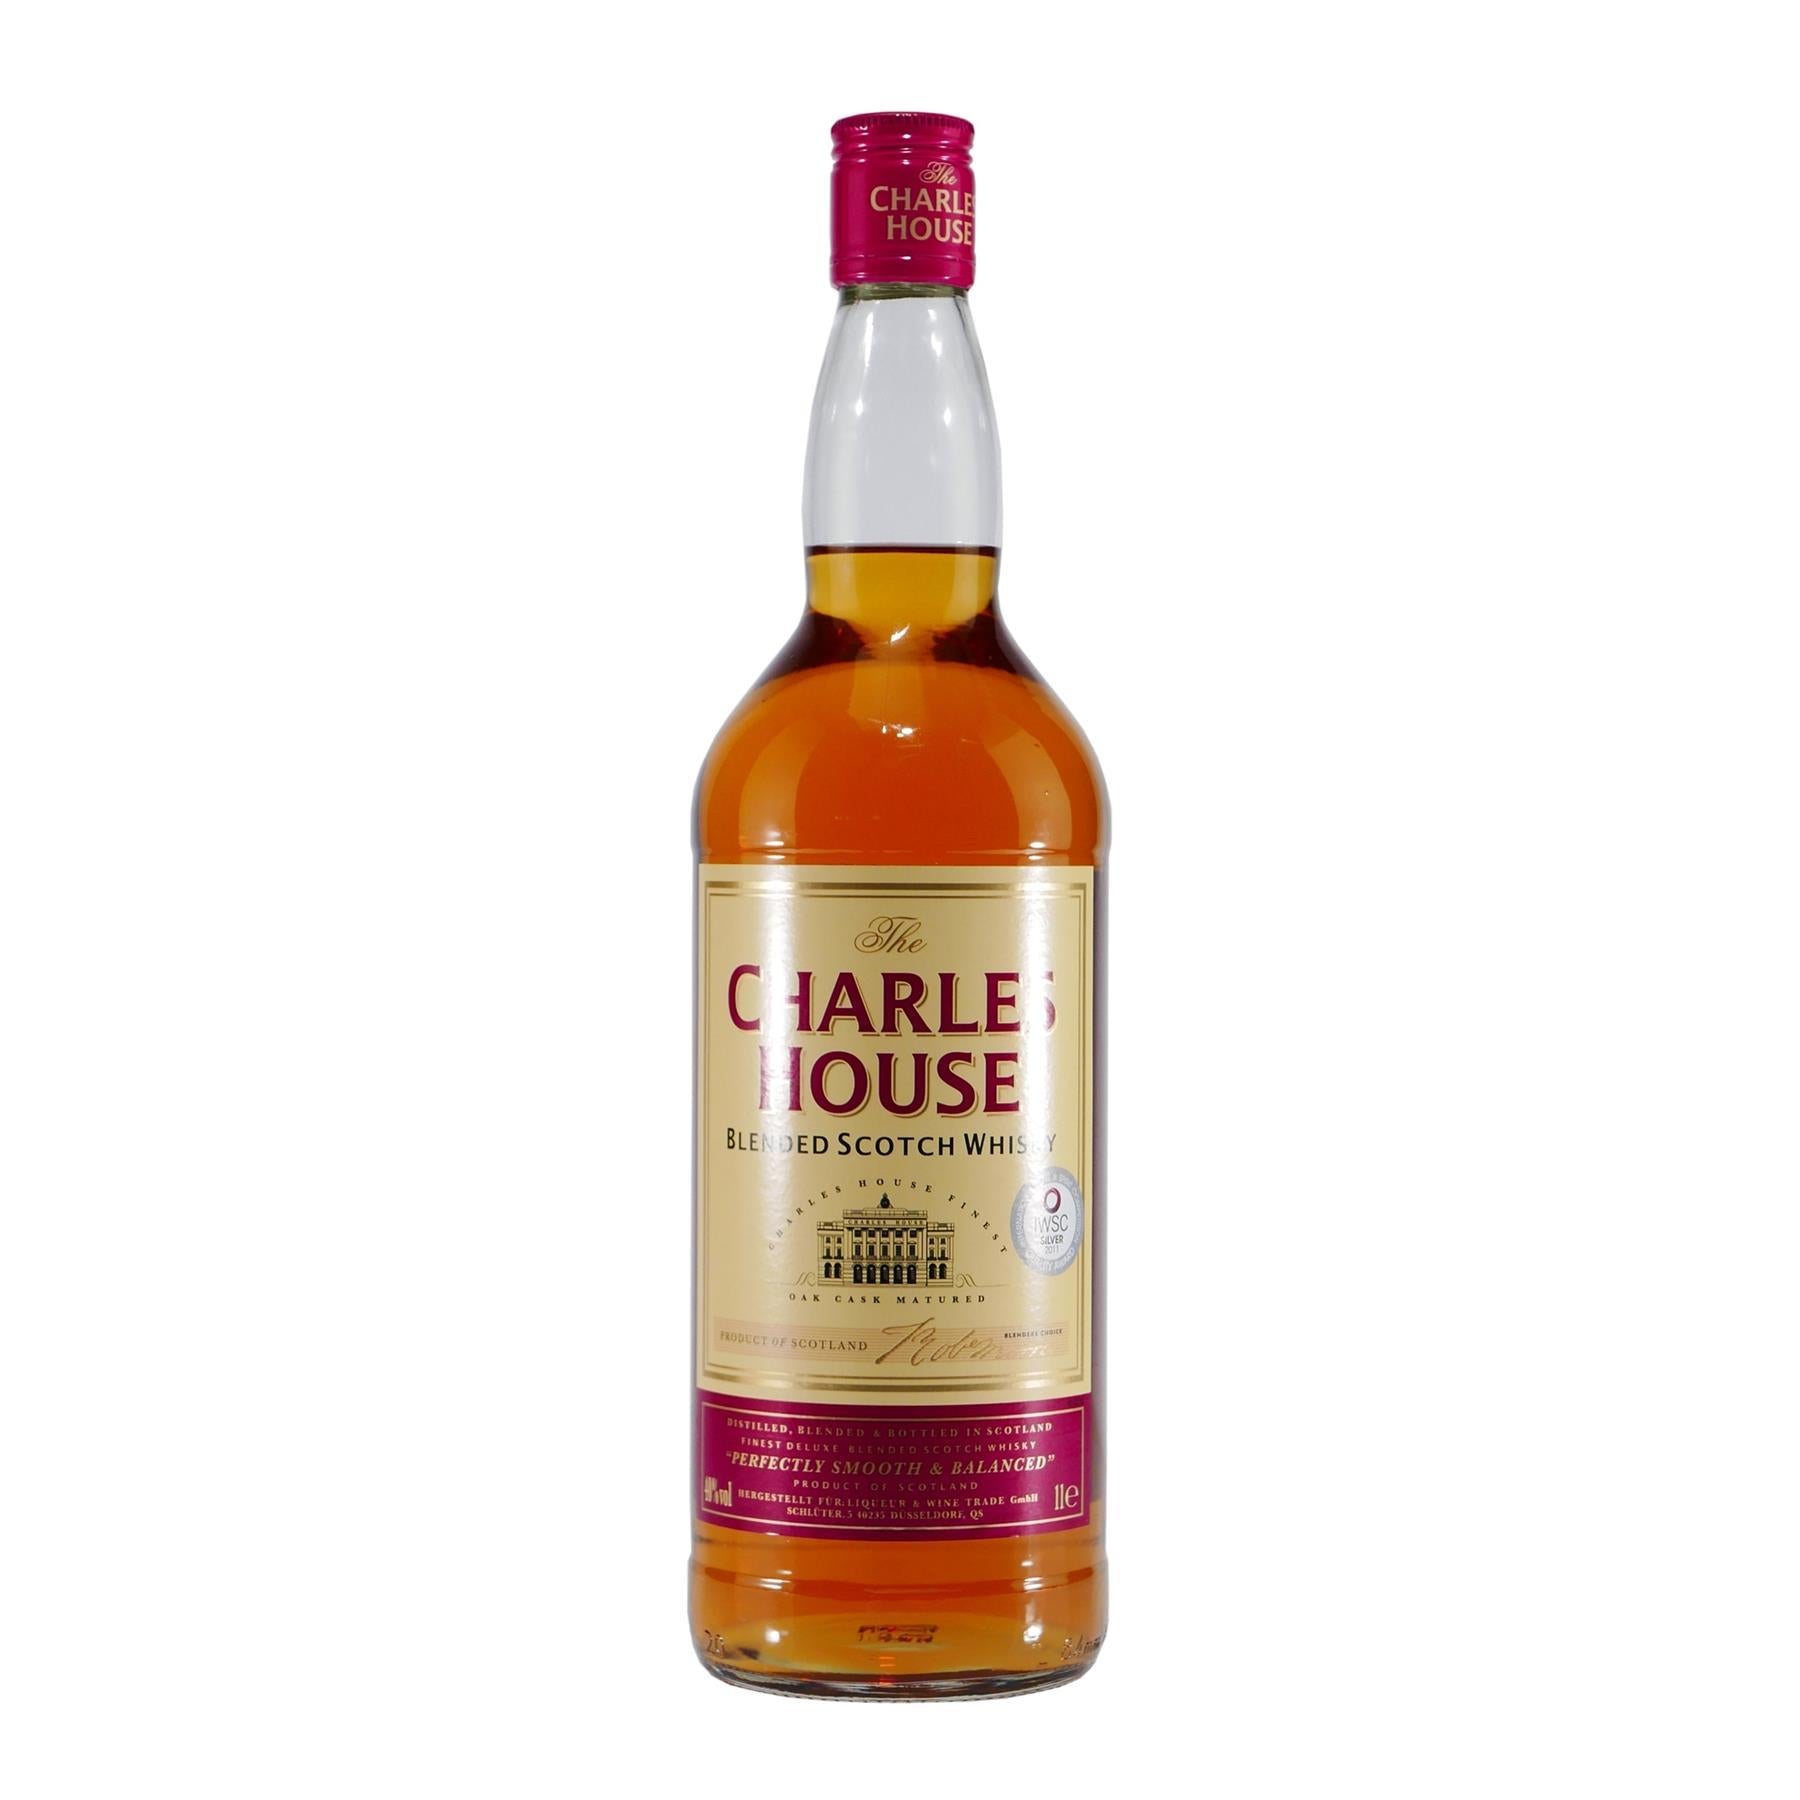 Charles House Blended Scotch Whisky (6 x 1,0L)